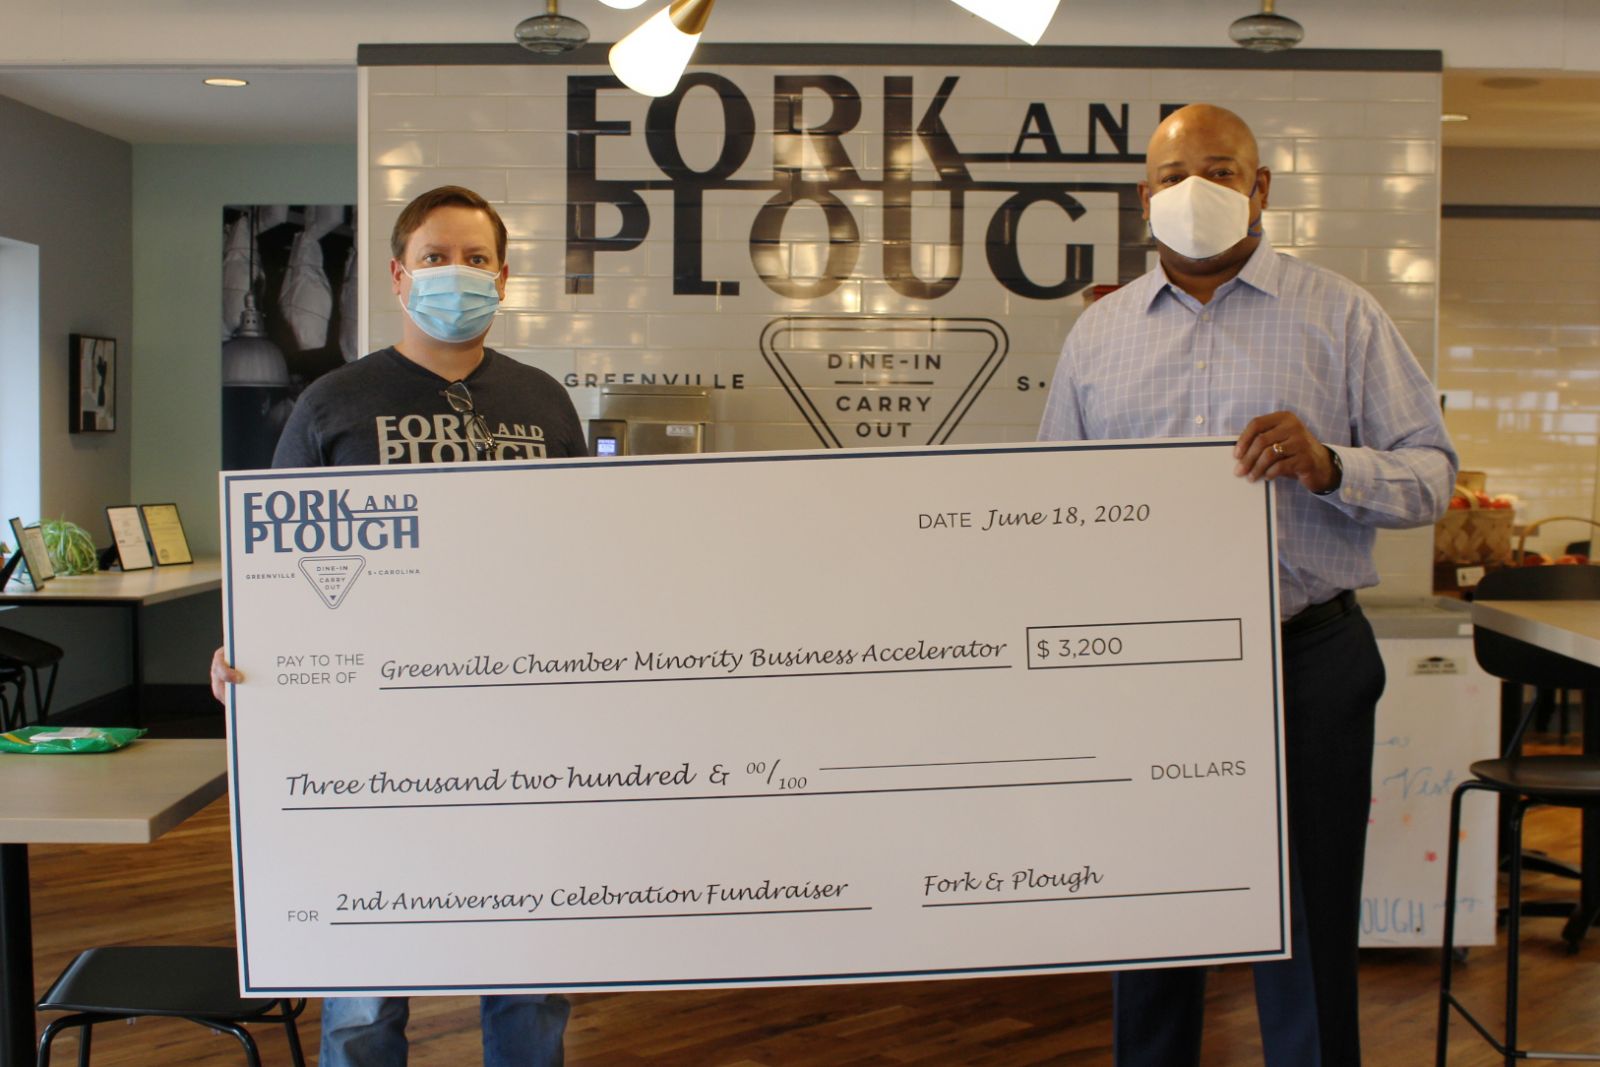 Fork and Plough celebrated its second anniversary with a donation to the Greenville Chamber's Minority Business Accelerator initiative. (Photo/Provided)